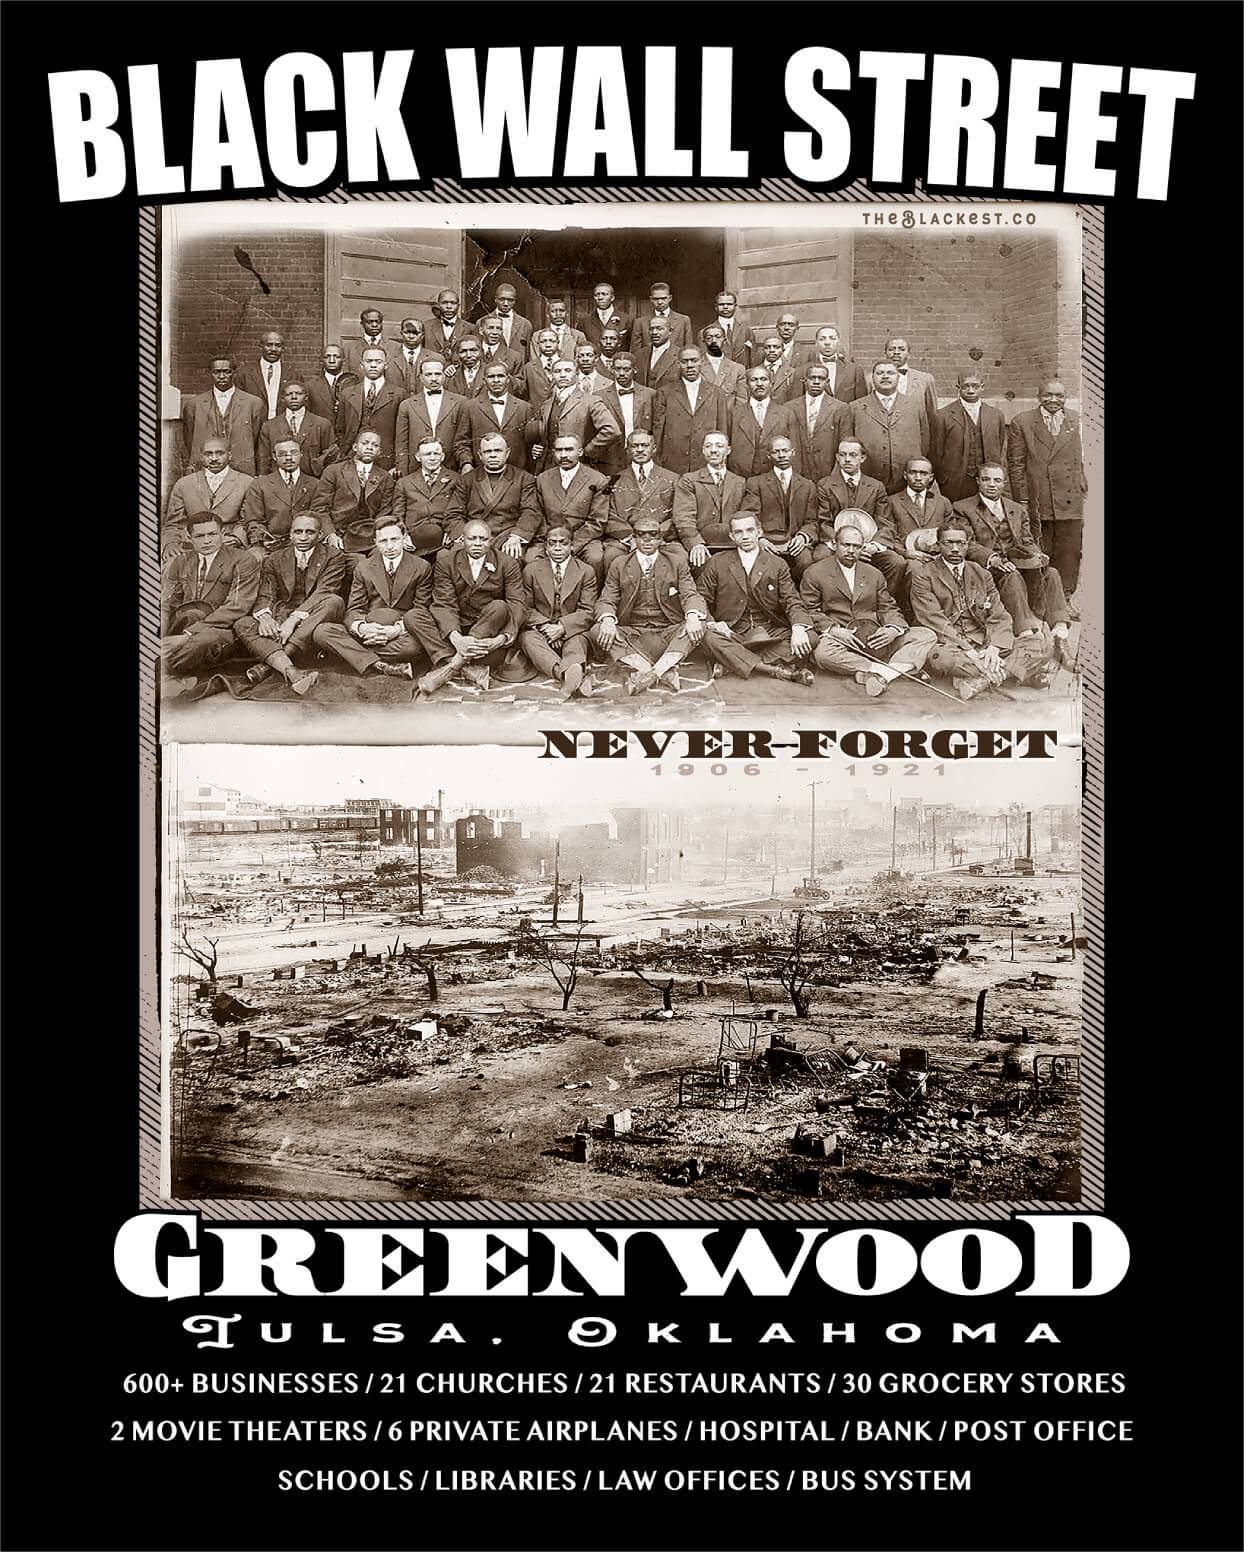 close up view of an apparel design with Black Wall Street and Greenwood written across a vintage image of historical Black Wall Street before and after 1921